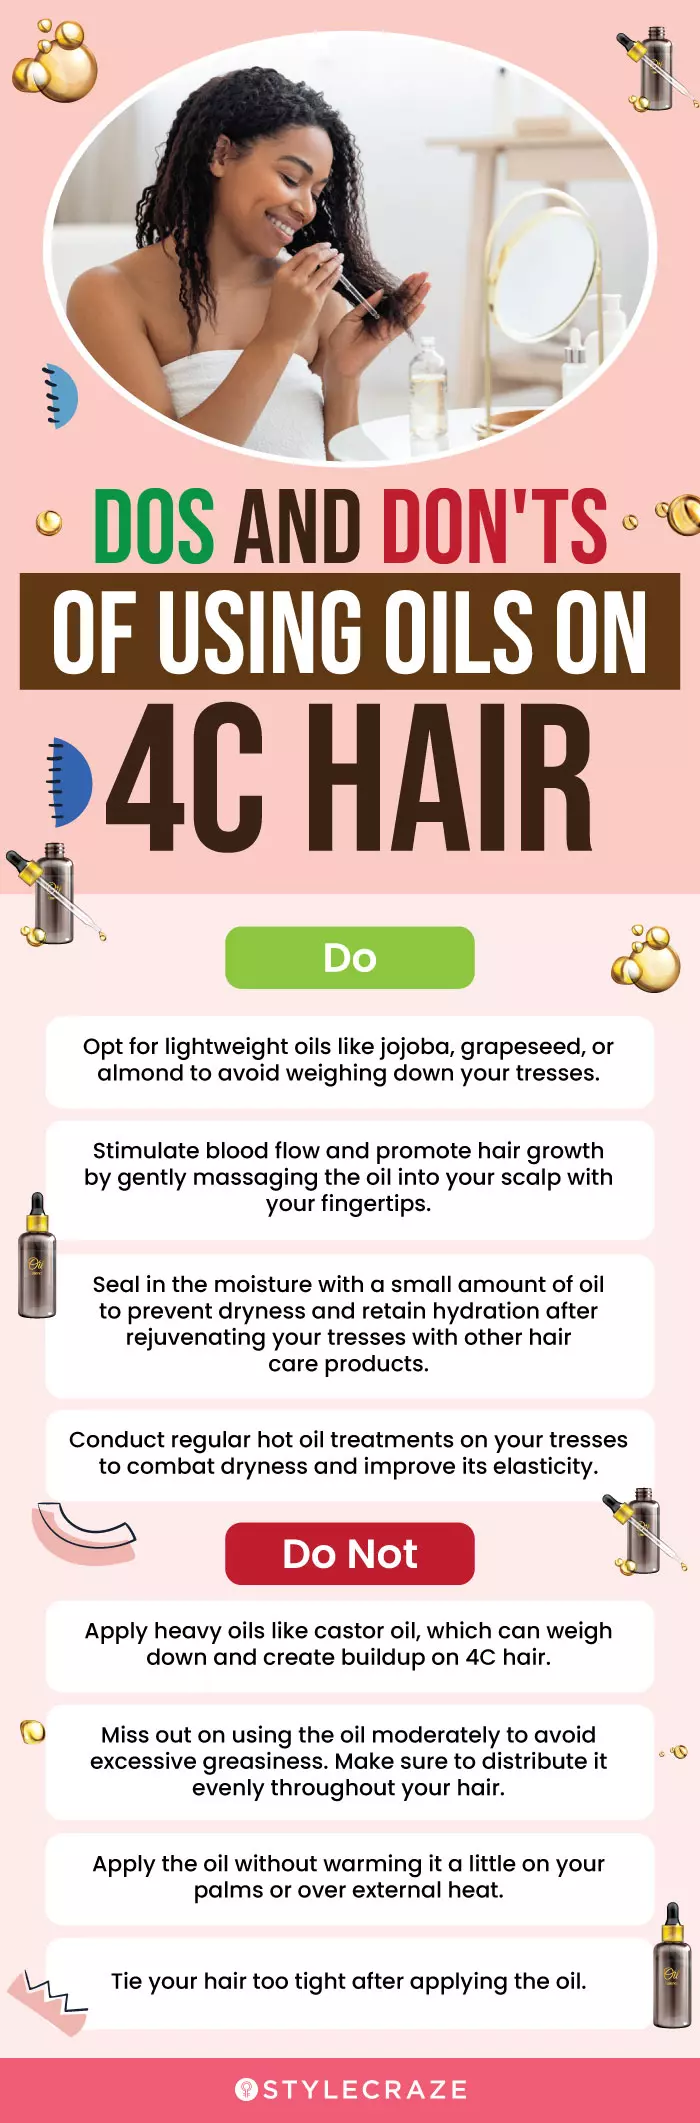 Dos And Don'ts Of Using Oils On 4C Hair (infographic)